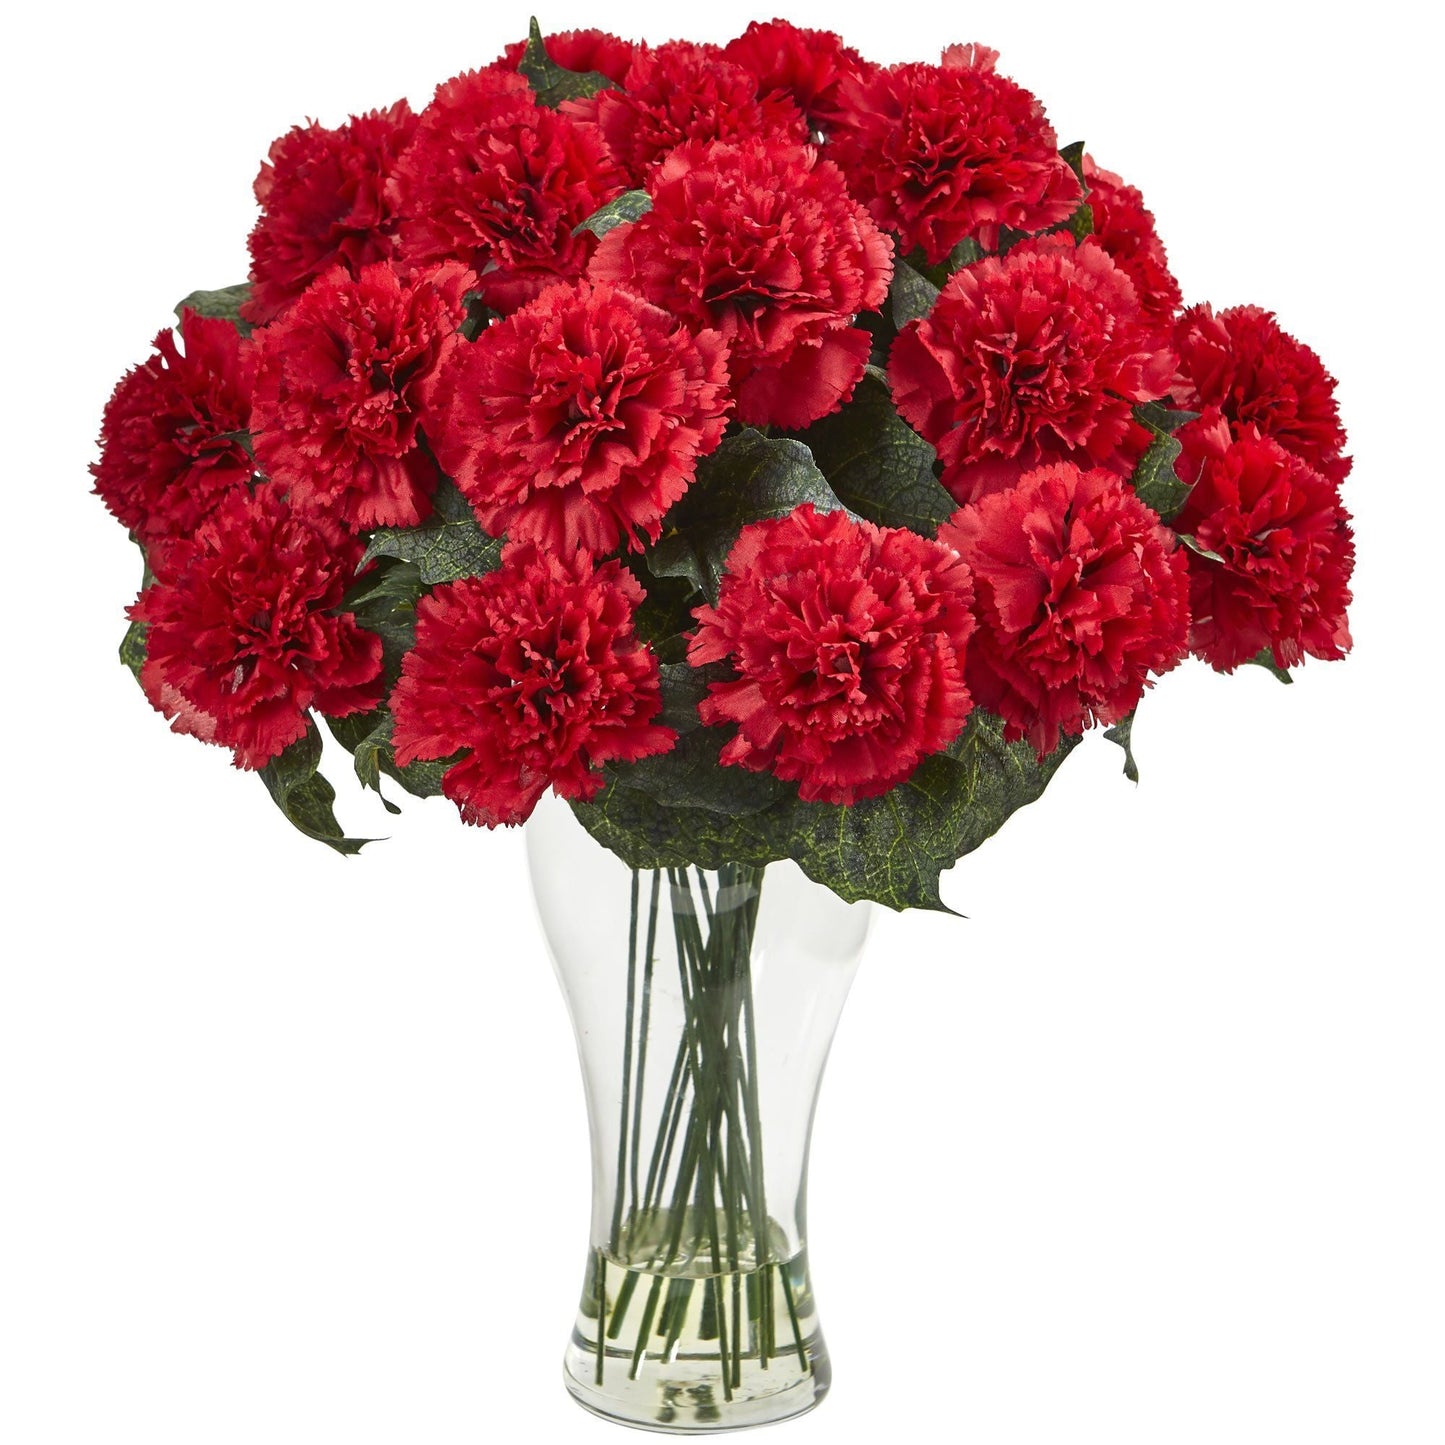 Blooming Carnation Arrangement w/Vase by Nearly Natural